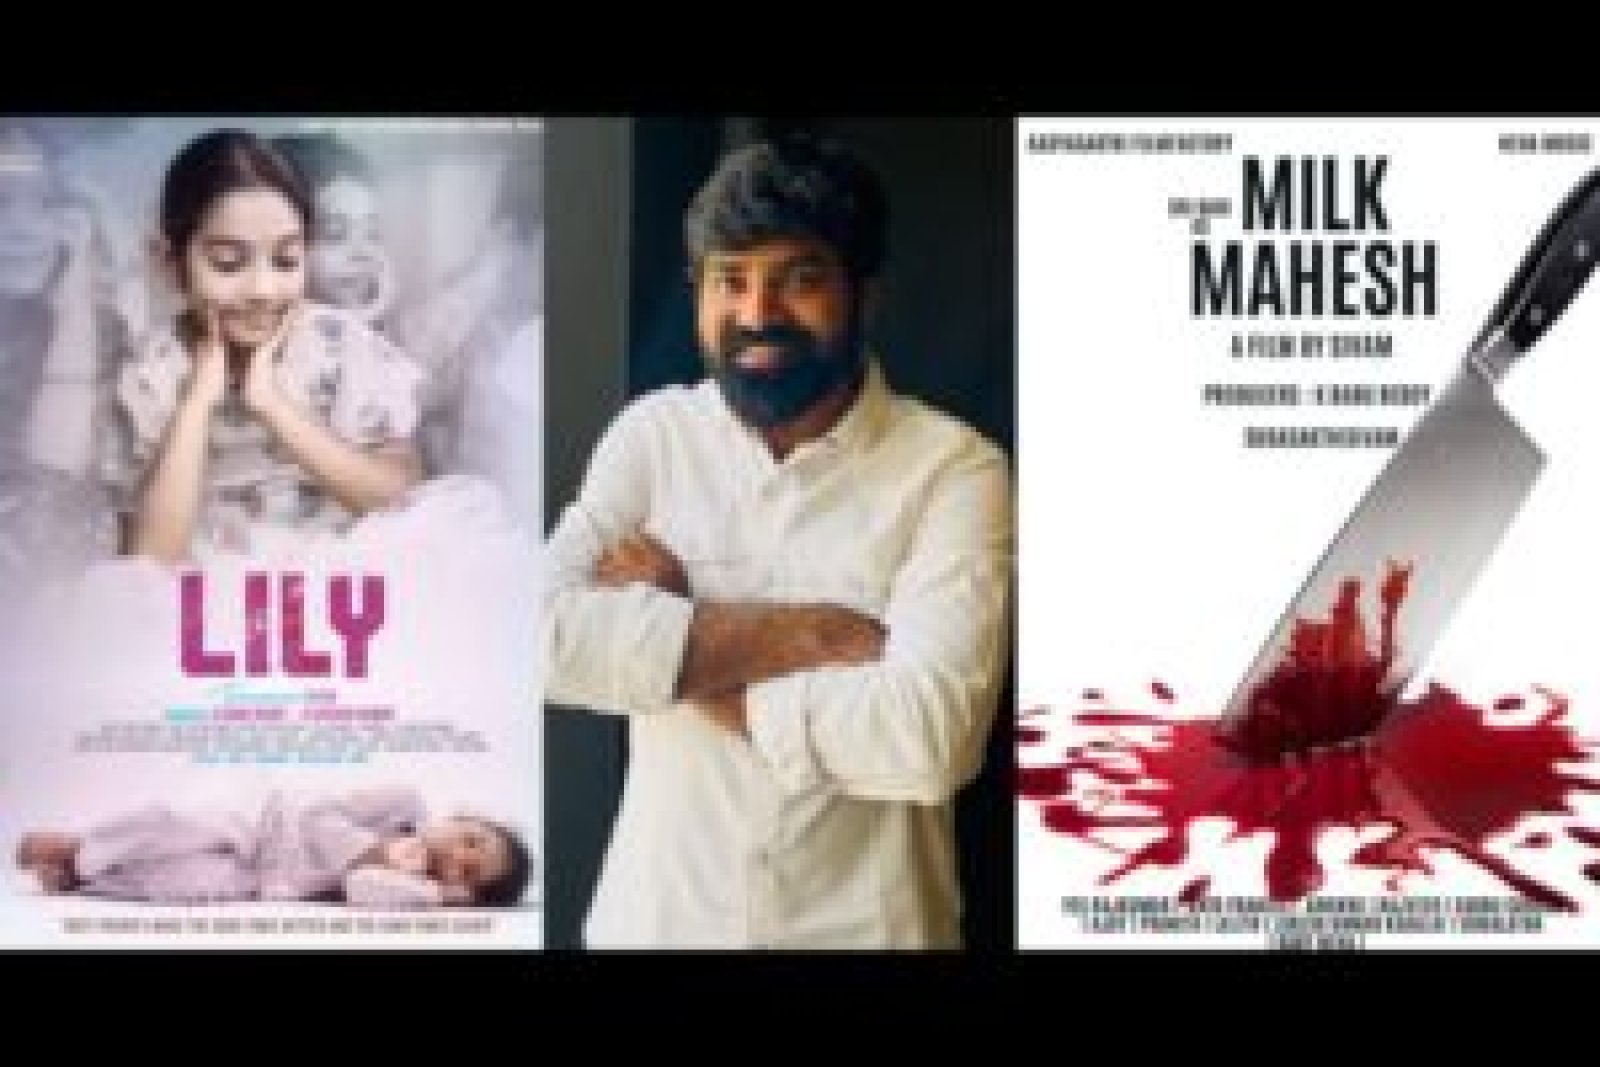 Telugu Director Sivam M Unveils Exciting Lineup of Projects After the Success of 'Lily'